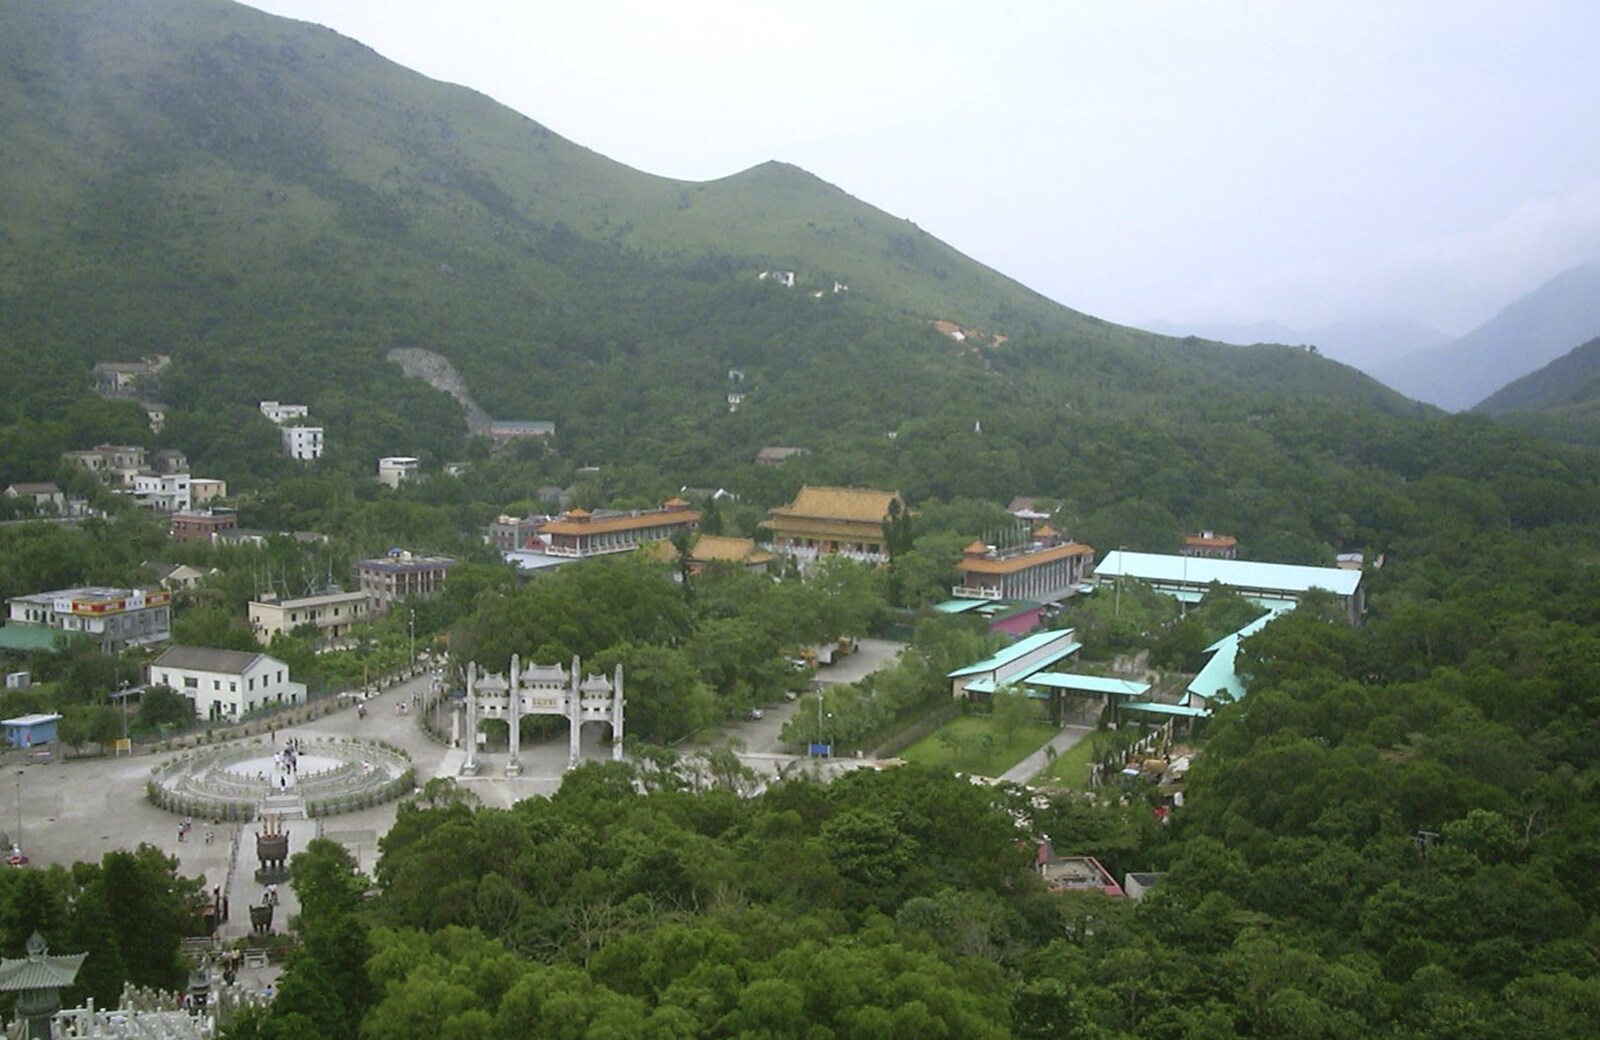 Lantau Island and the Po Lin Monastery, Hong Kong, China - 14th August 2001: Another aerial view of the monastery